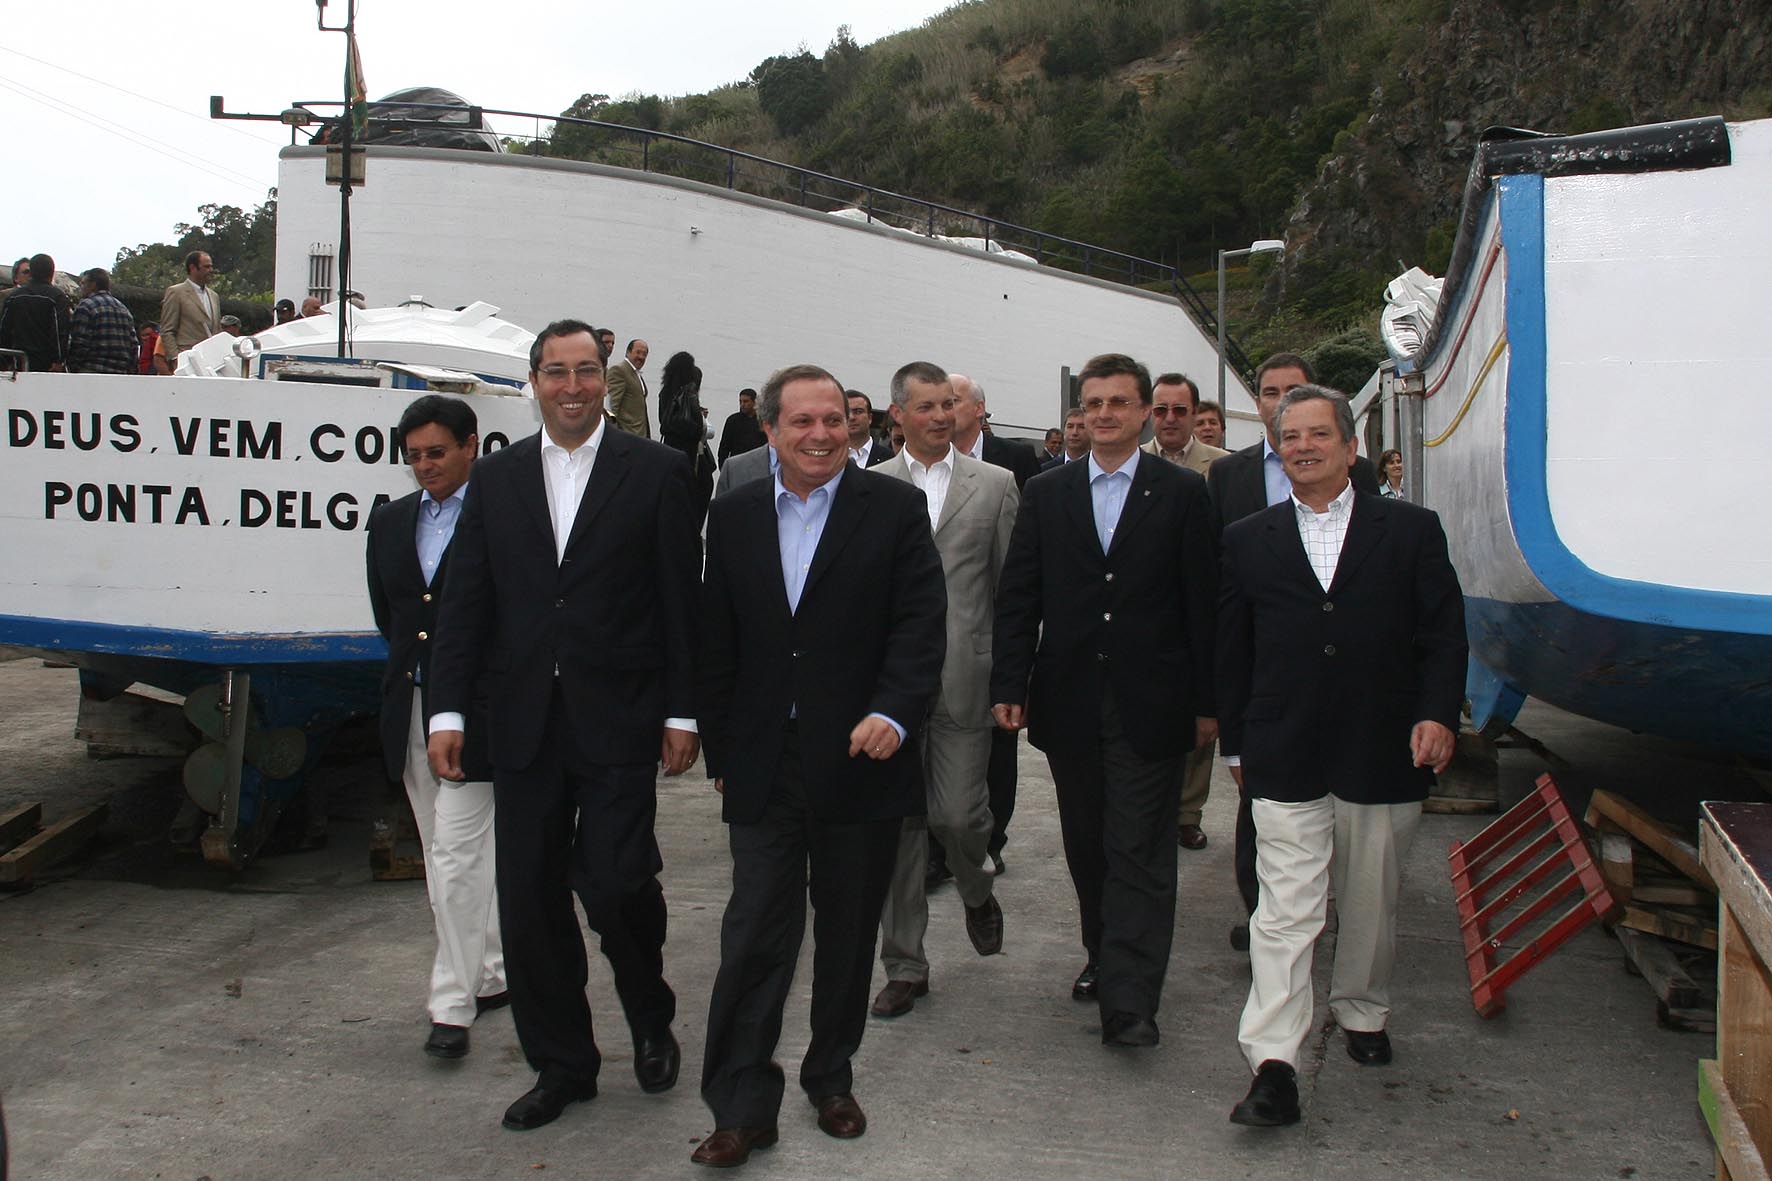 Carlos César opens Caloura port stressing the importance of fisheries